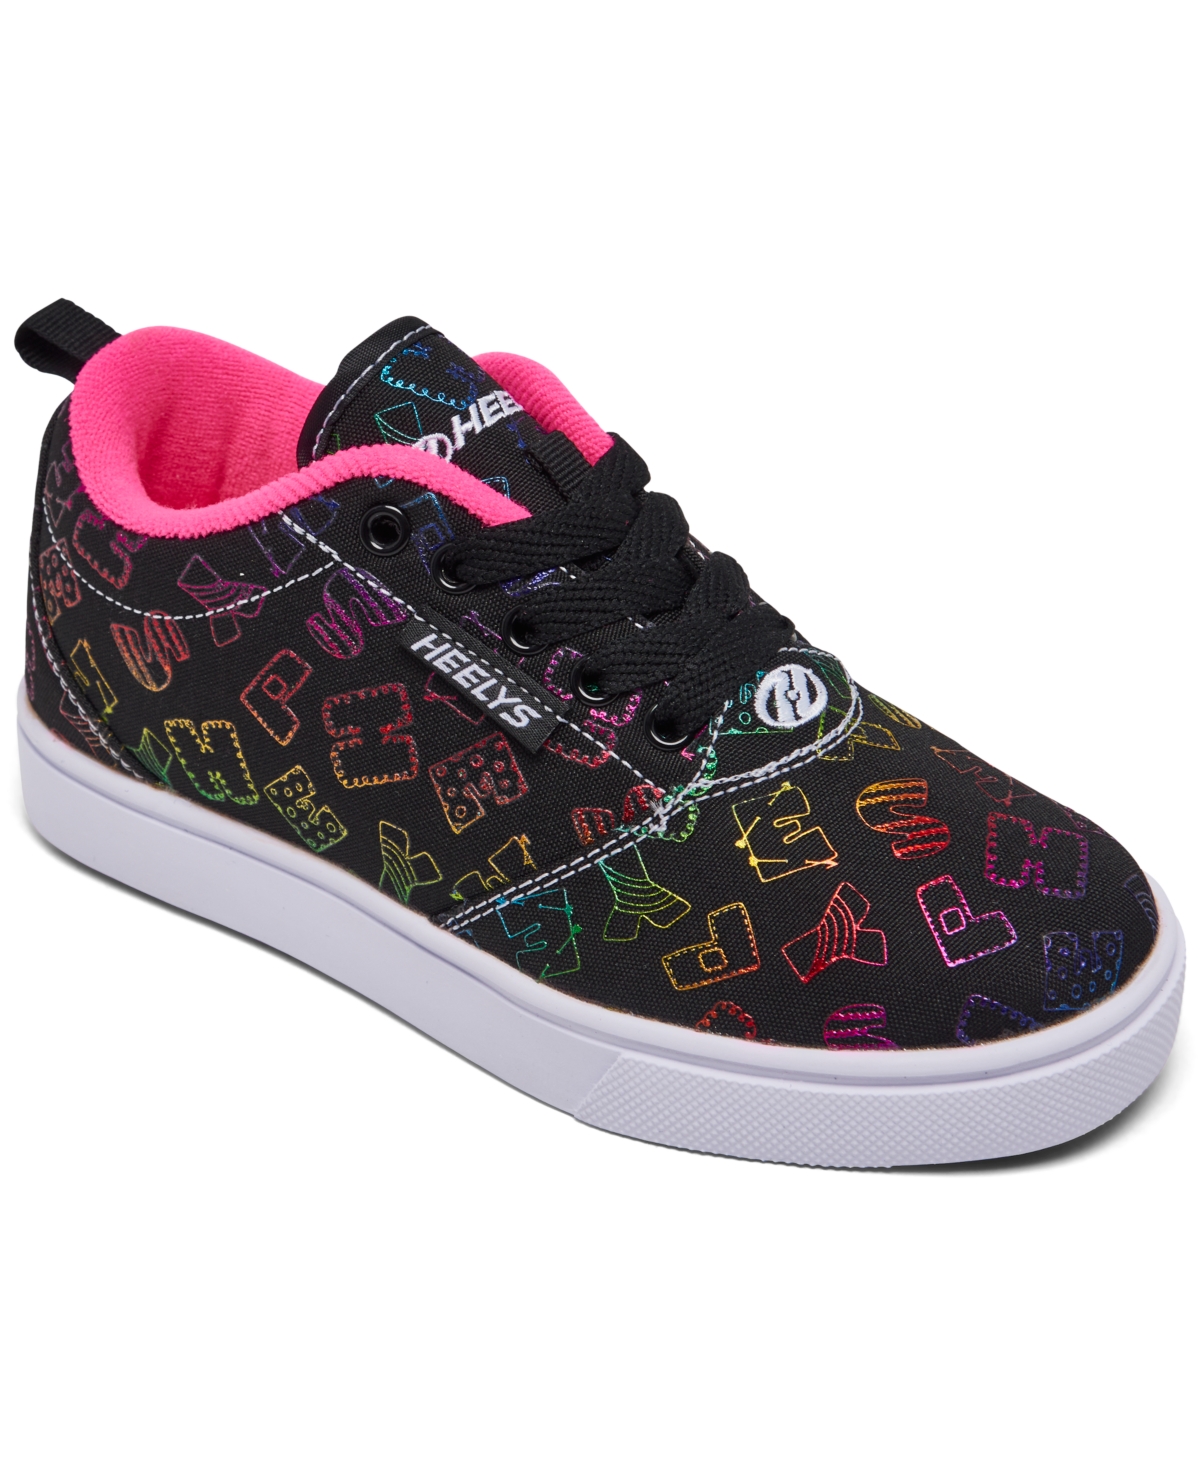 HEELYS BIG GIRLS PRO 20 DOODLE PRINT WHEELED SKATE CASUAL SNEAKERS FROM FINISH LINE